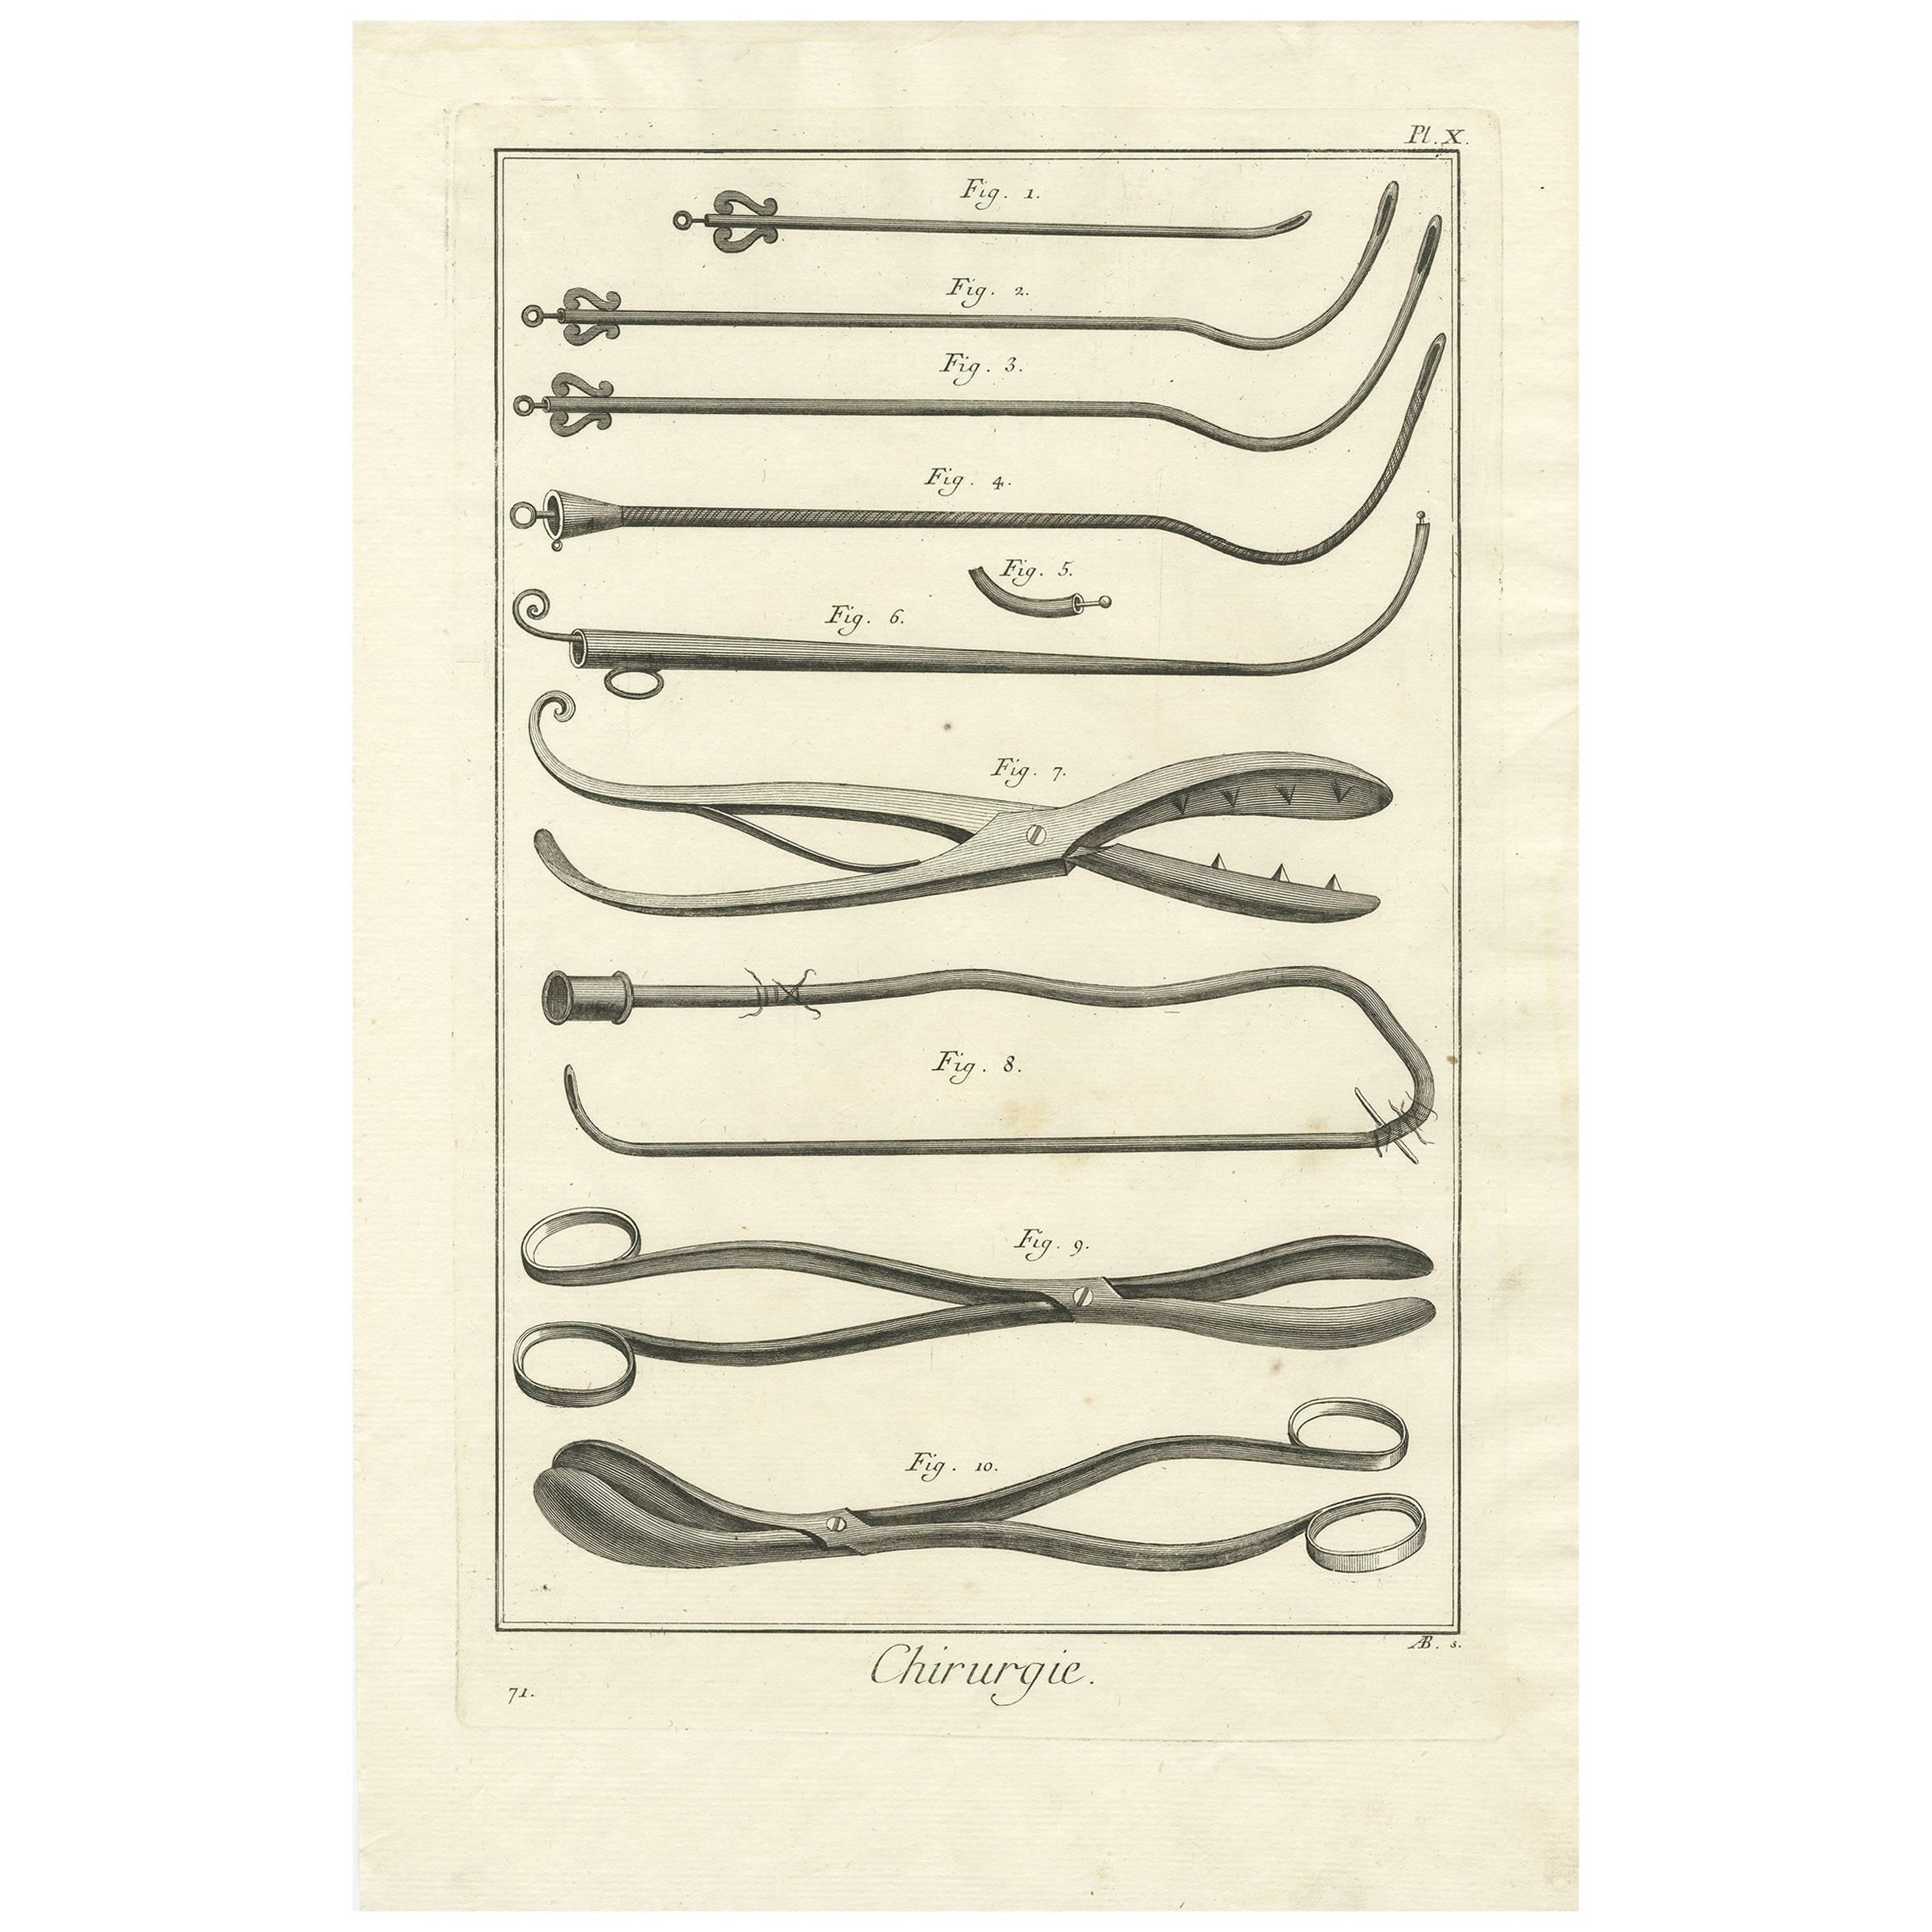 Antique Medical Print 'Pl. X' by D. Diderot, circa 1760